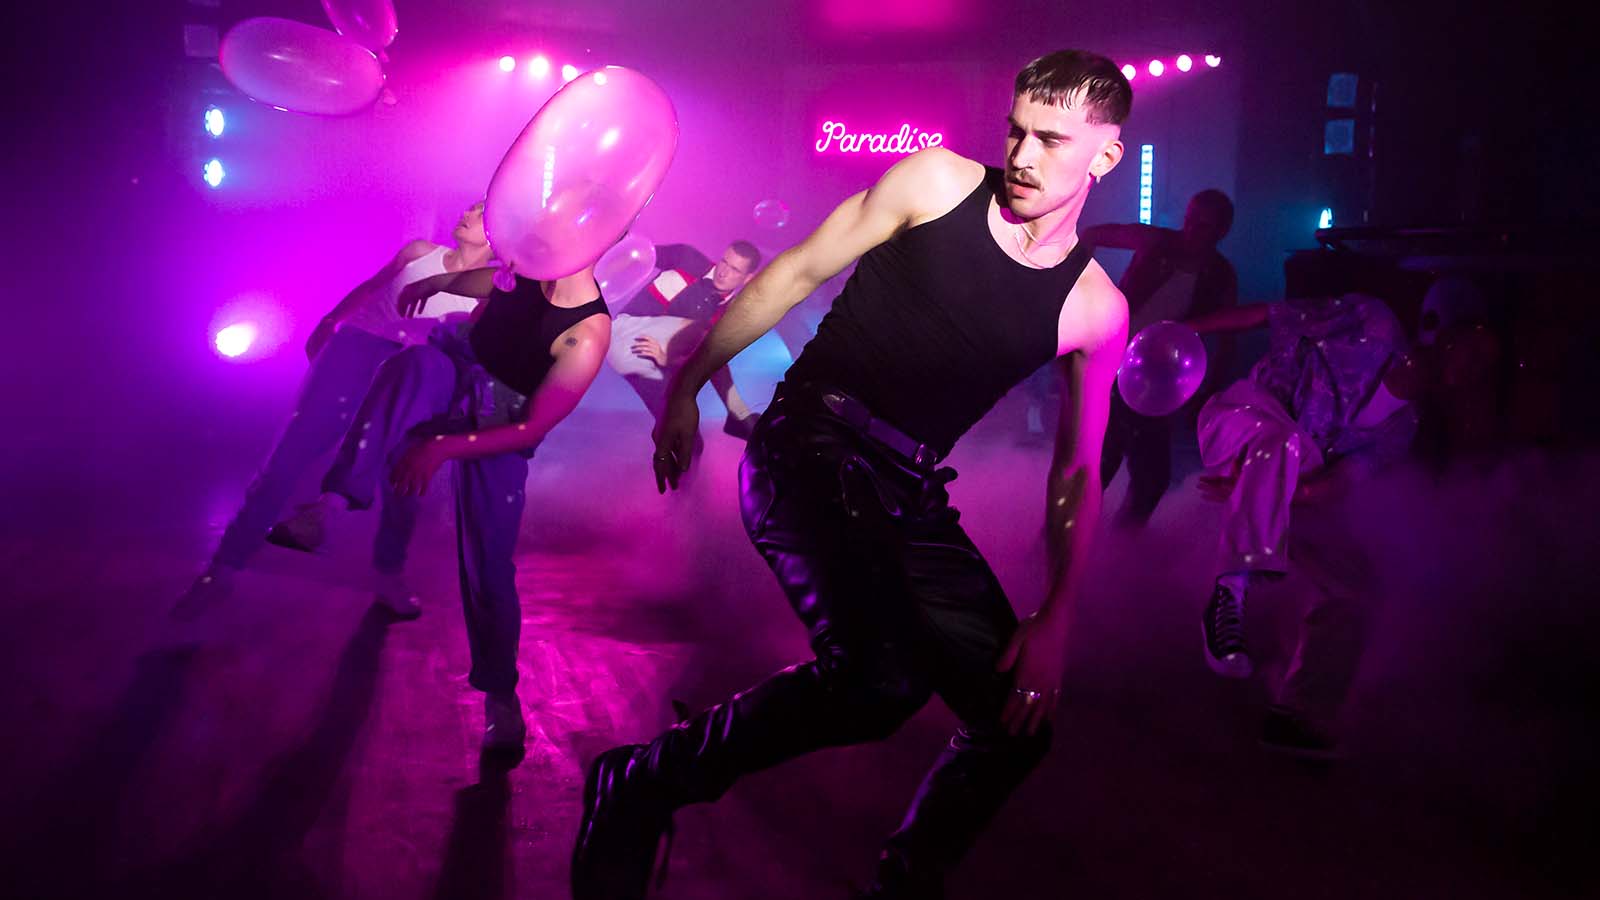 A group of dancers partying on a stage lit in smokey pink and purple lights. Balloons fall from the ceiling and in the background, the word 'Paradise' is lit up in pink neon light.